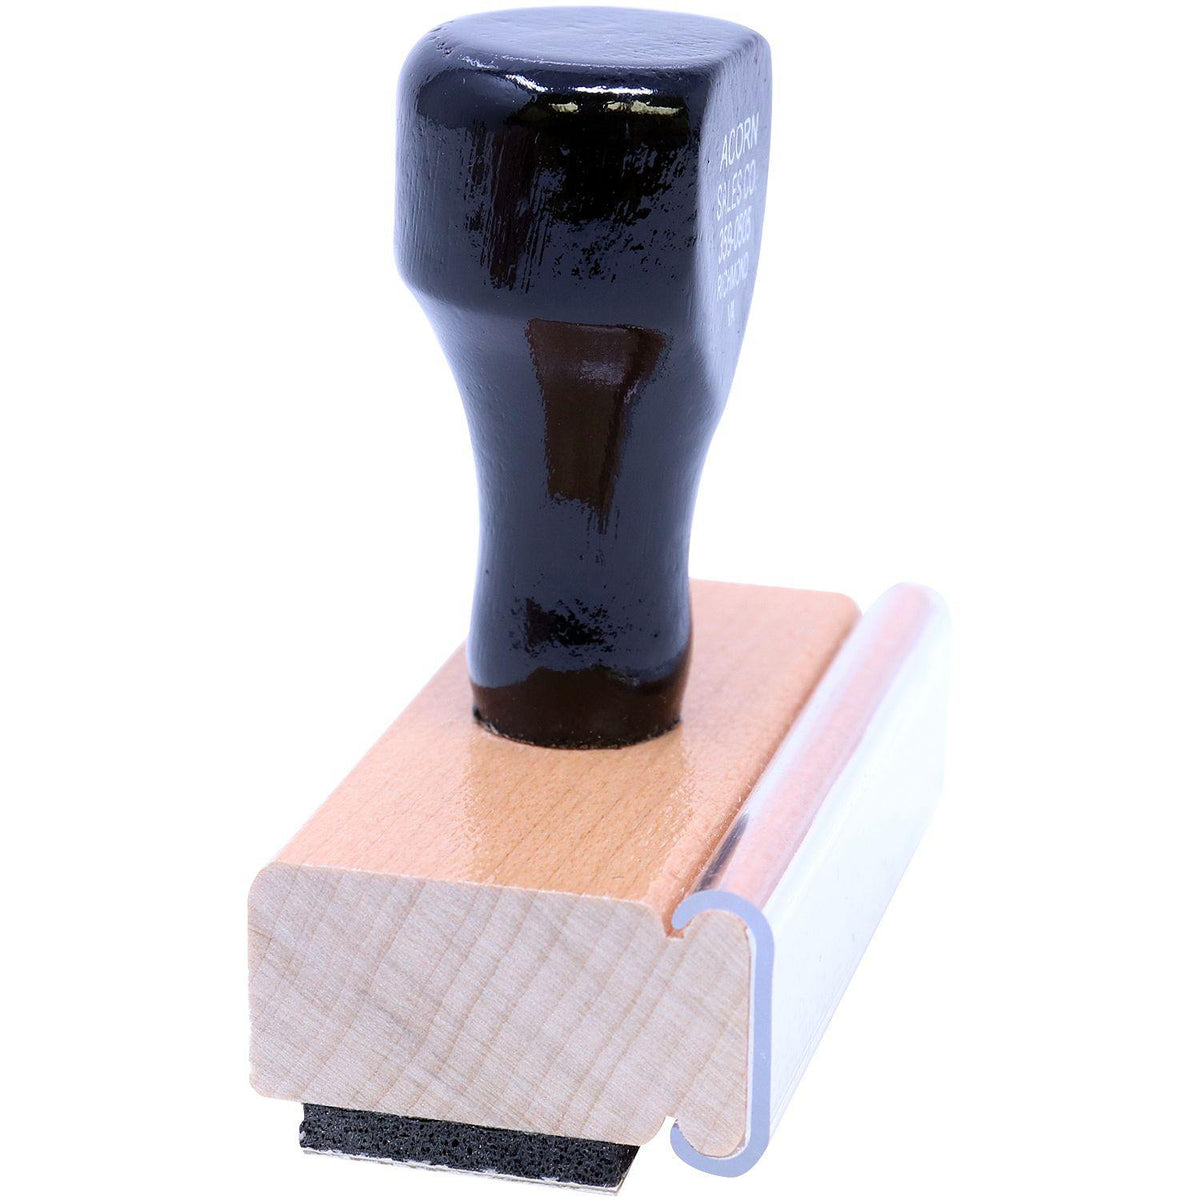 Large Thank You Rubber Stamp - Engineer Seal Stamps - Brand_Acorn, Impression Size_Large, Stamp Type_Regular Stamp, Type of Use_Business, Type of Use_General